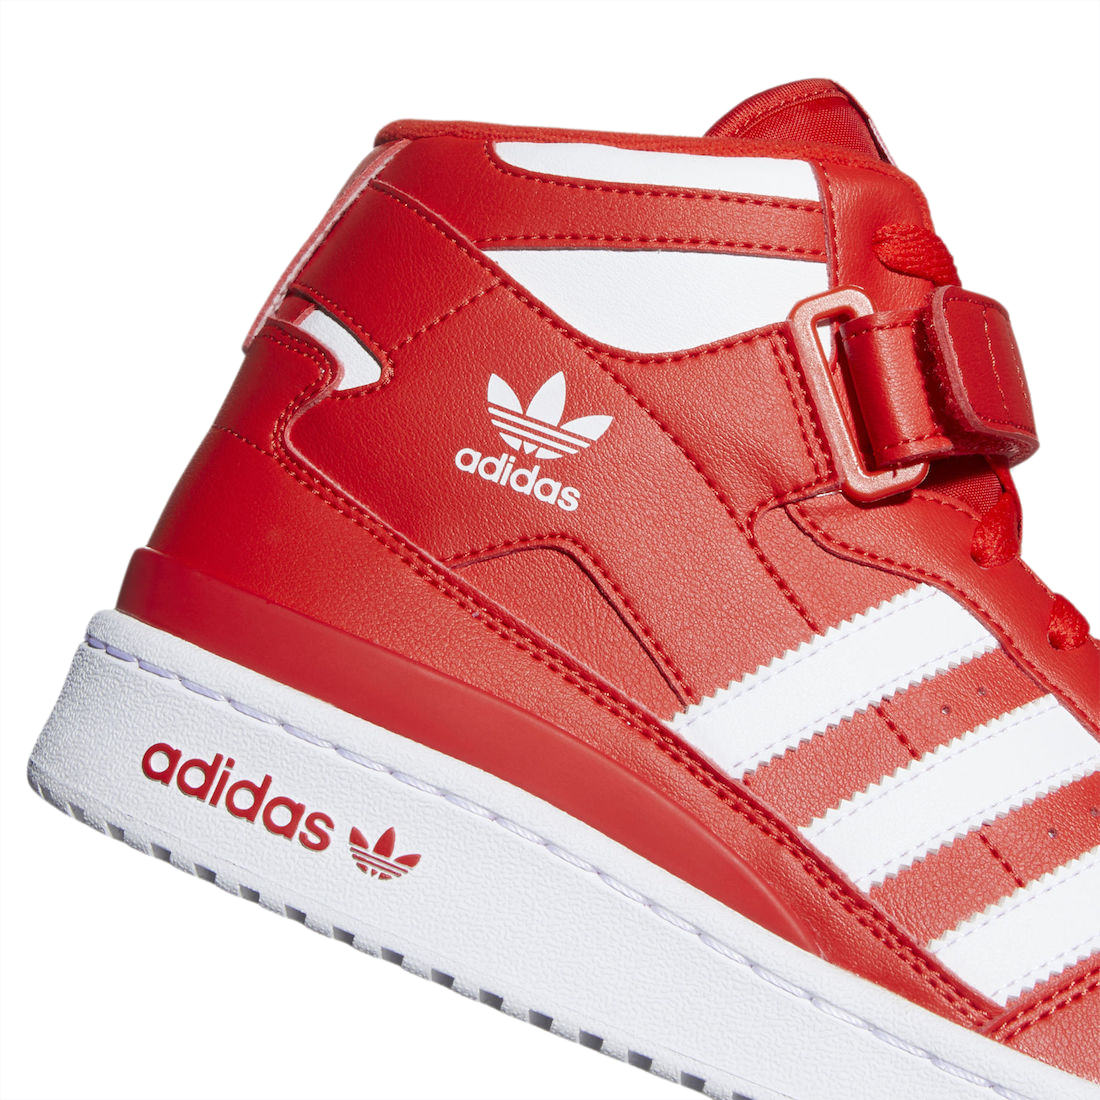 adidas Forum Mid Red White GY5792